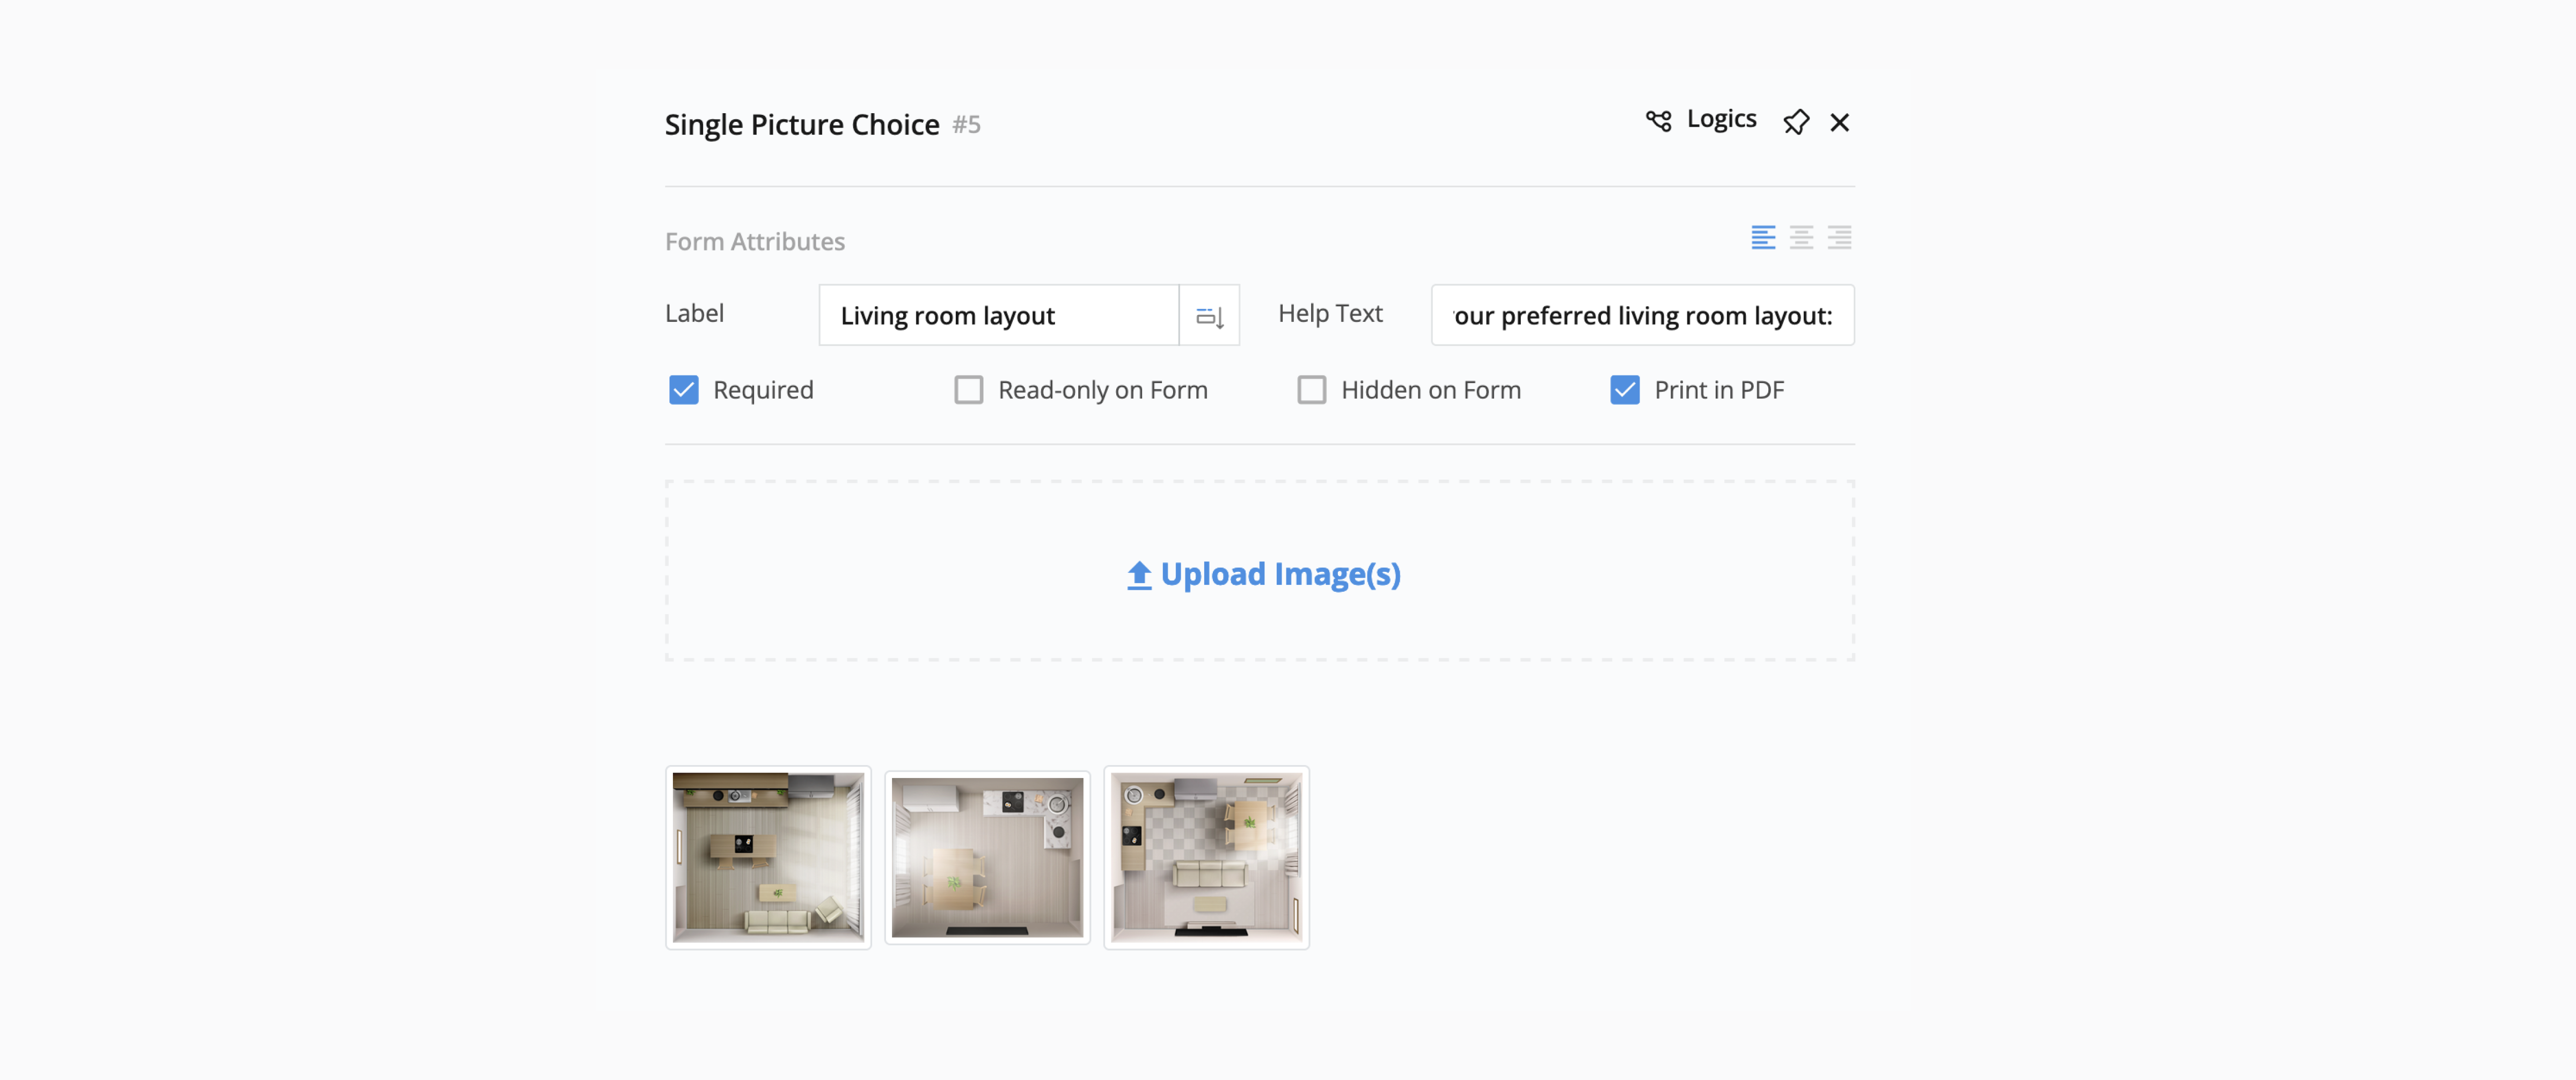 Upload images to Picture Choice